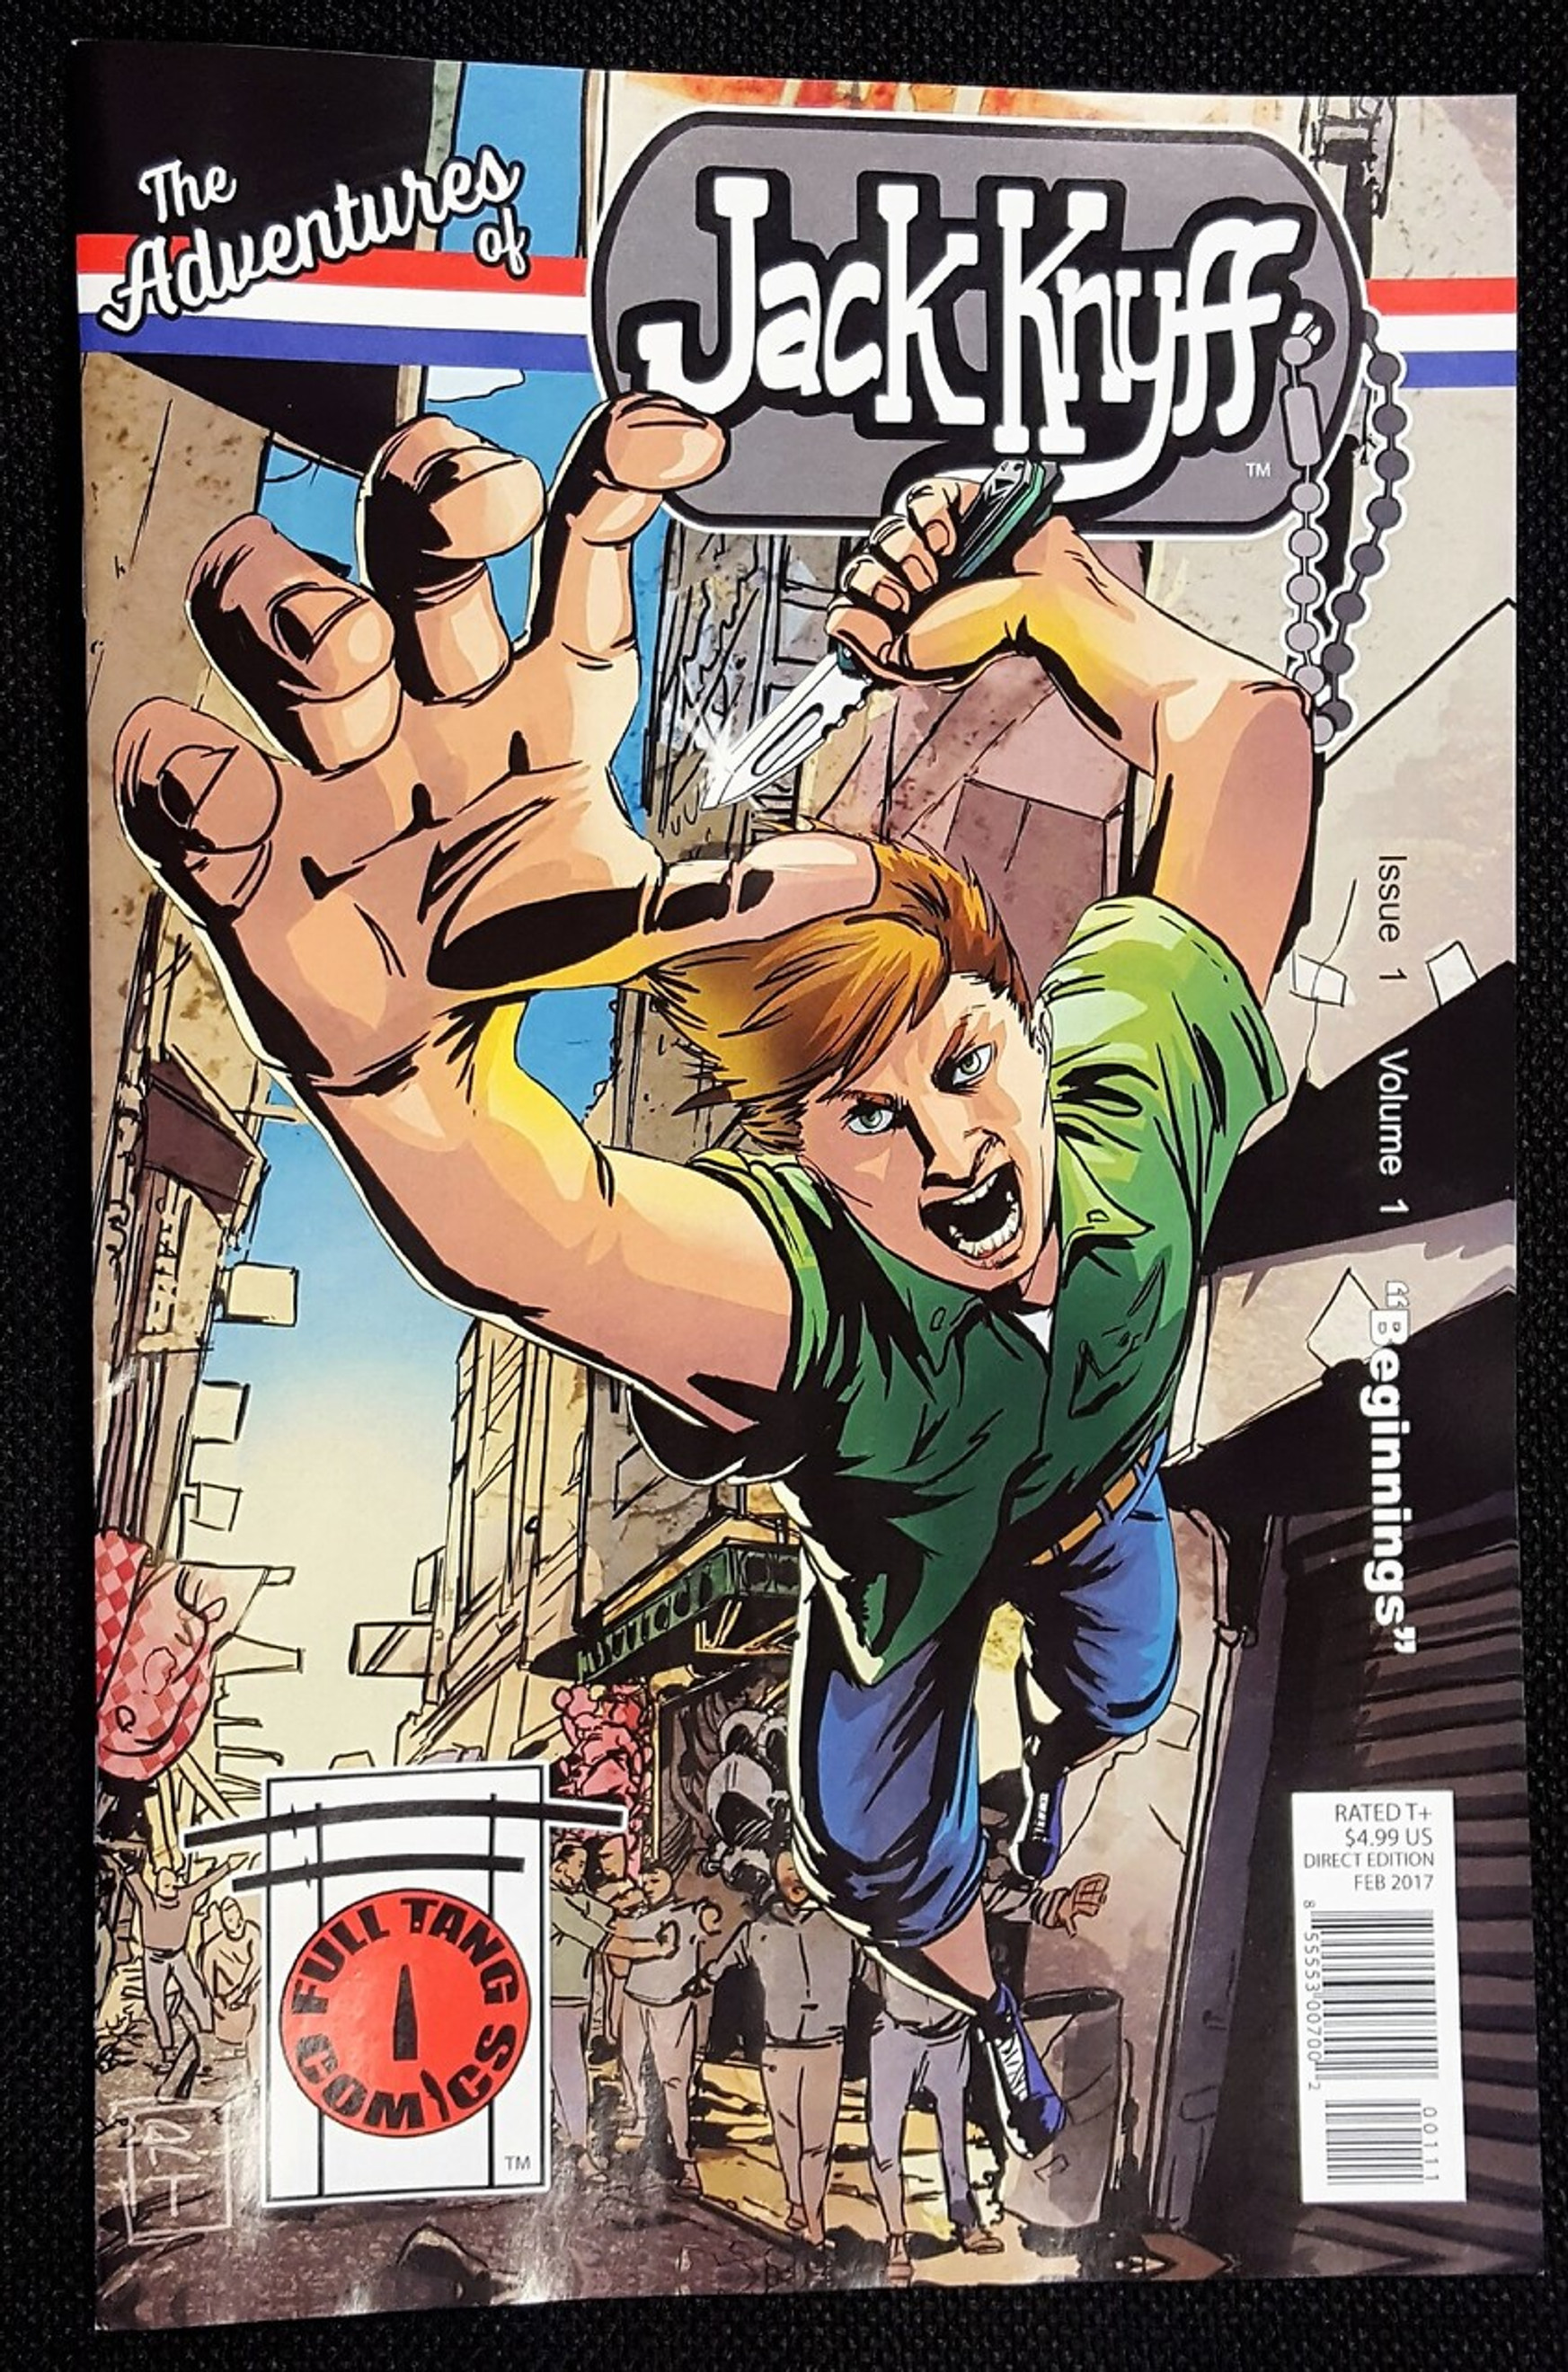 Medford Comic 'The Adventures of Jack Knyff' Issue 1, Vol 1